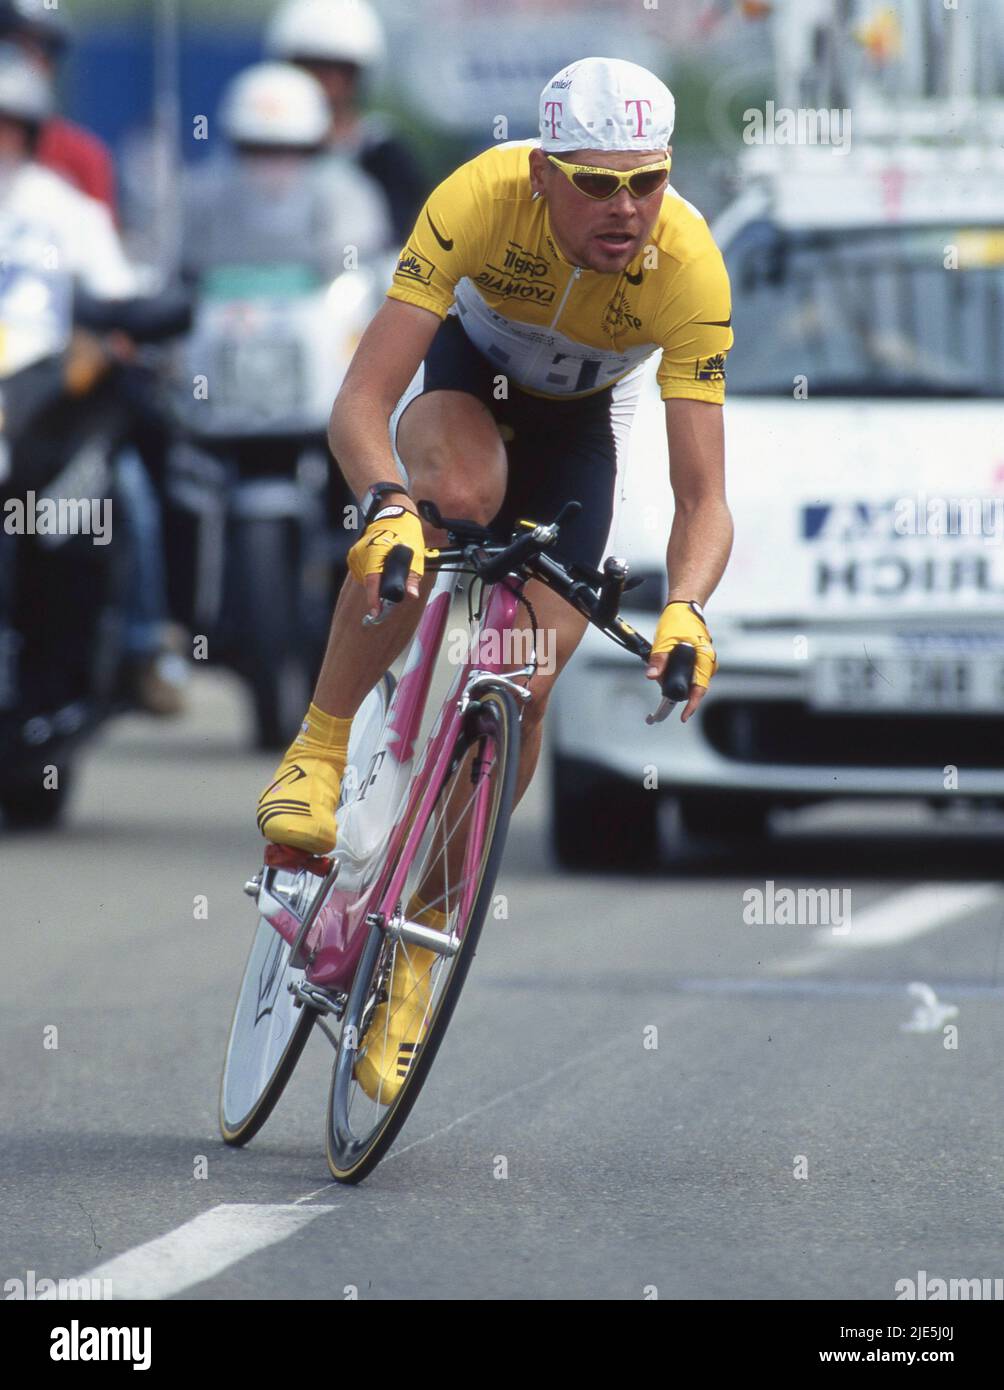 Paris, Deutschland. 30th June, 2017. Exactly 25 years ago, Jan Ullrich won the Tour de France France, historic victory, icon of sport in Germany firo: Tour de France 1997 cycling cycling winner of the tour award ceremony in the yellow jersey Jan Ullrich Team Telekom single action Credit: dpa/Alamy Live News Stock Photo